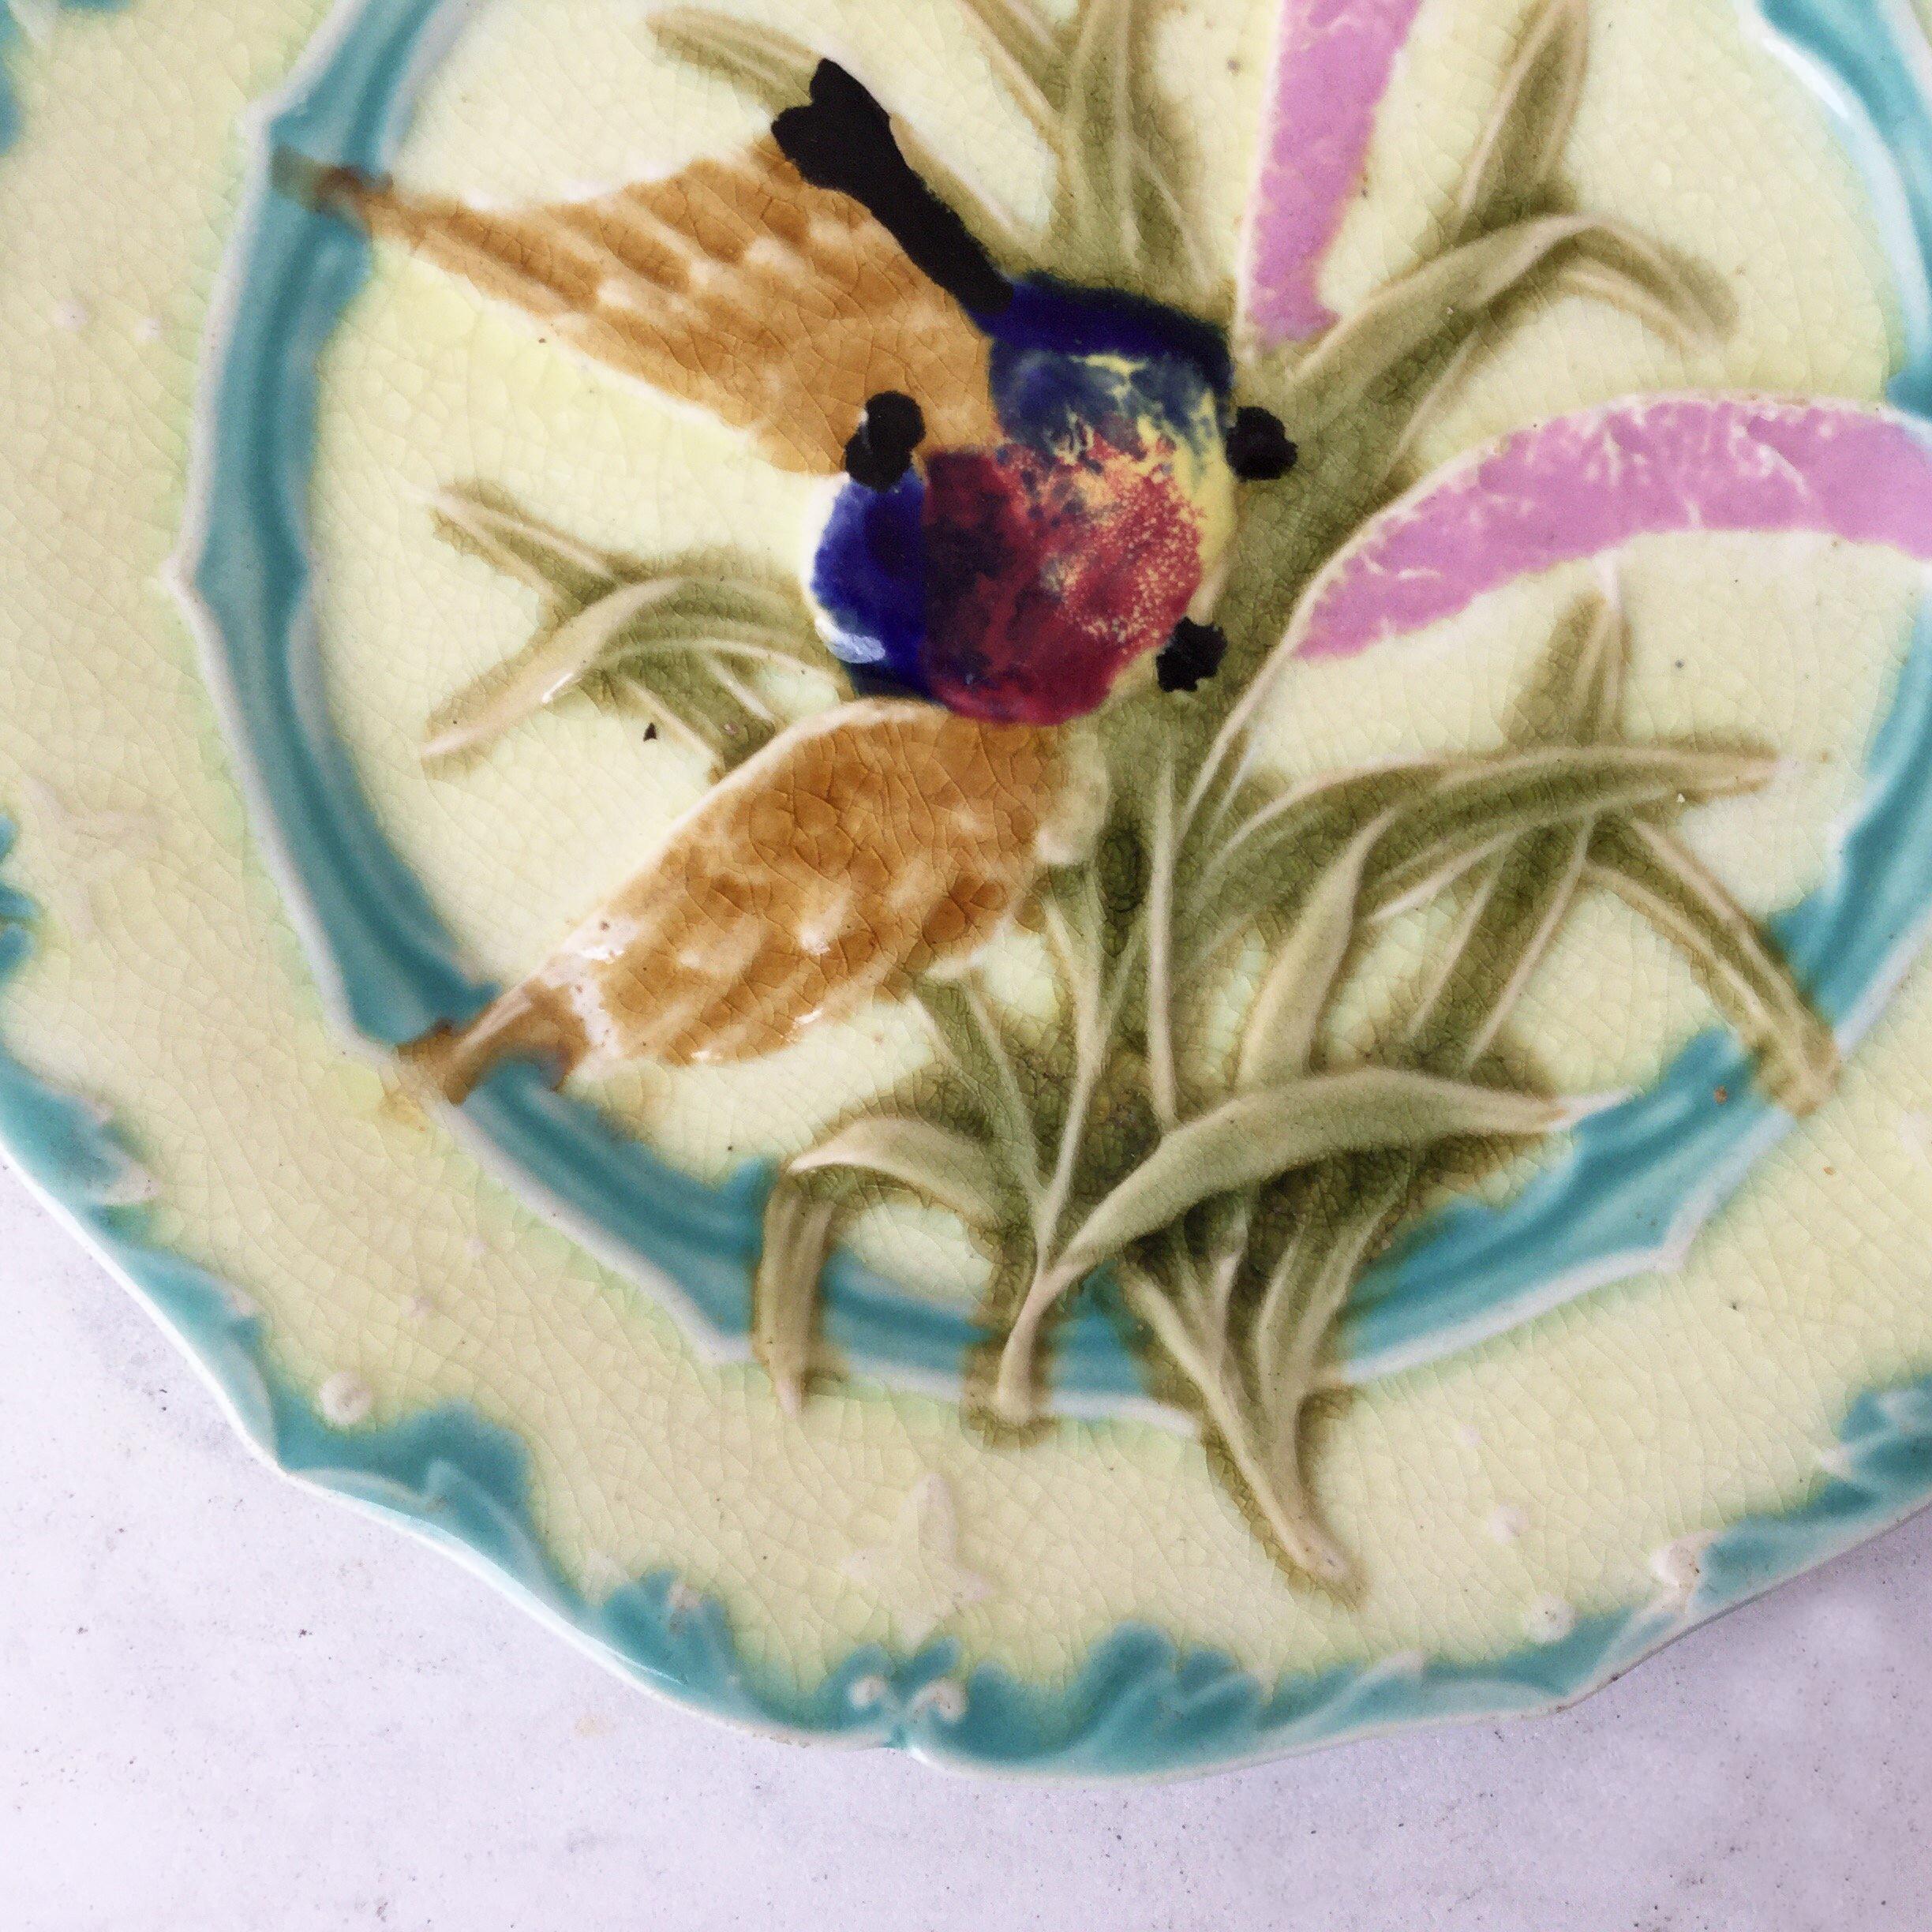 Lovely Majolica plate with bird and insect, leaves signed Saint Amand, circa 1890.